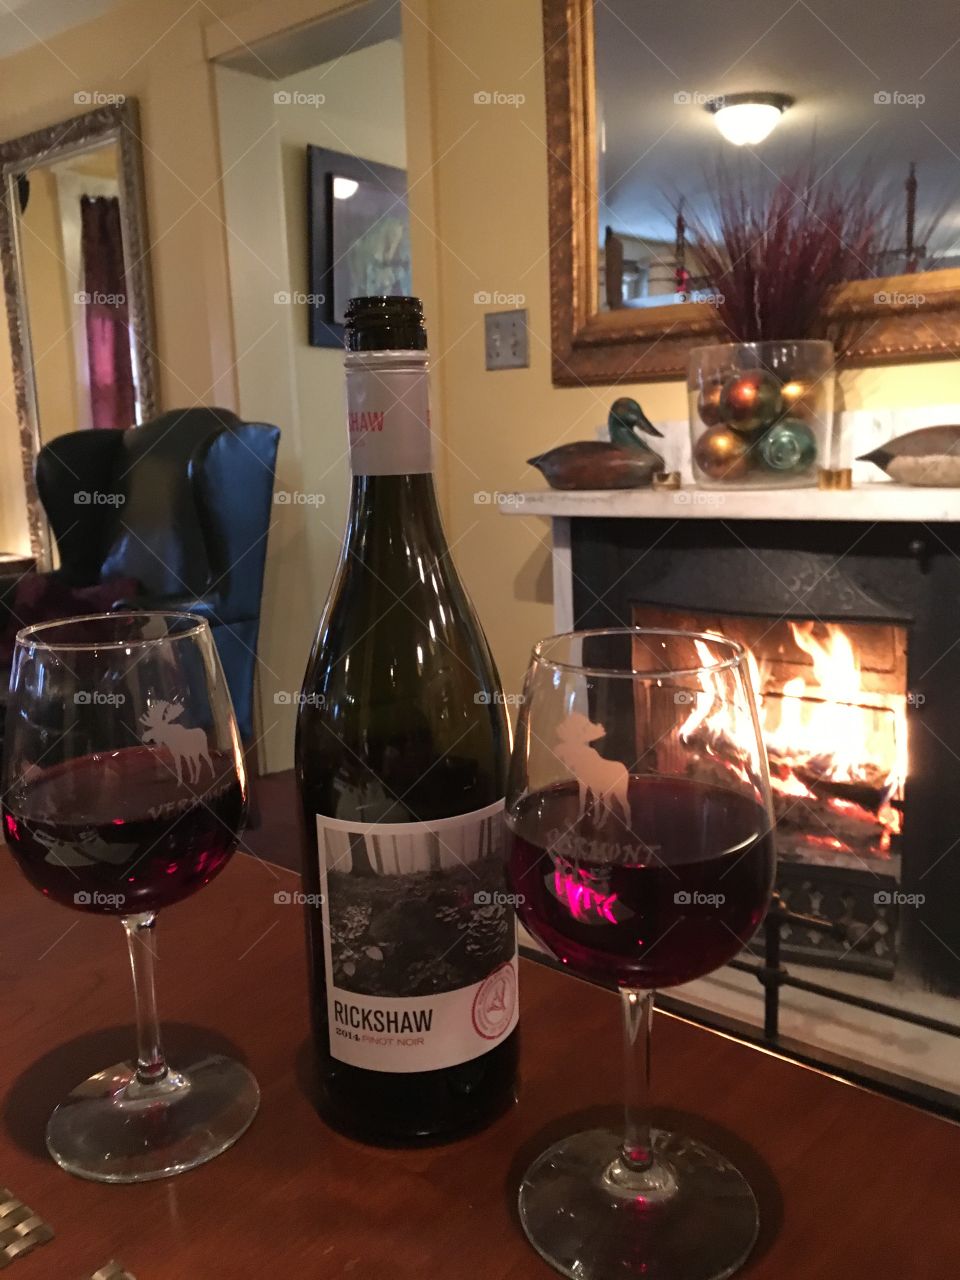 A cozy dinner and wine next to the fireplace in Vermont